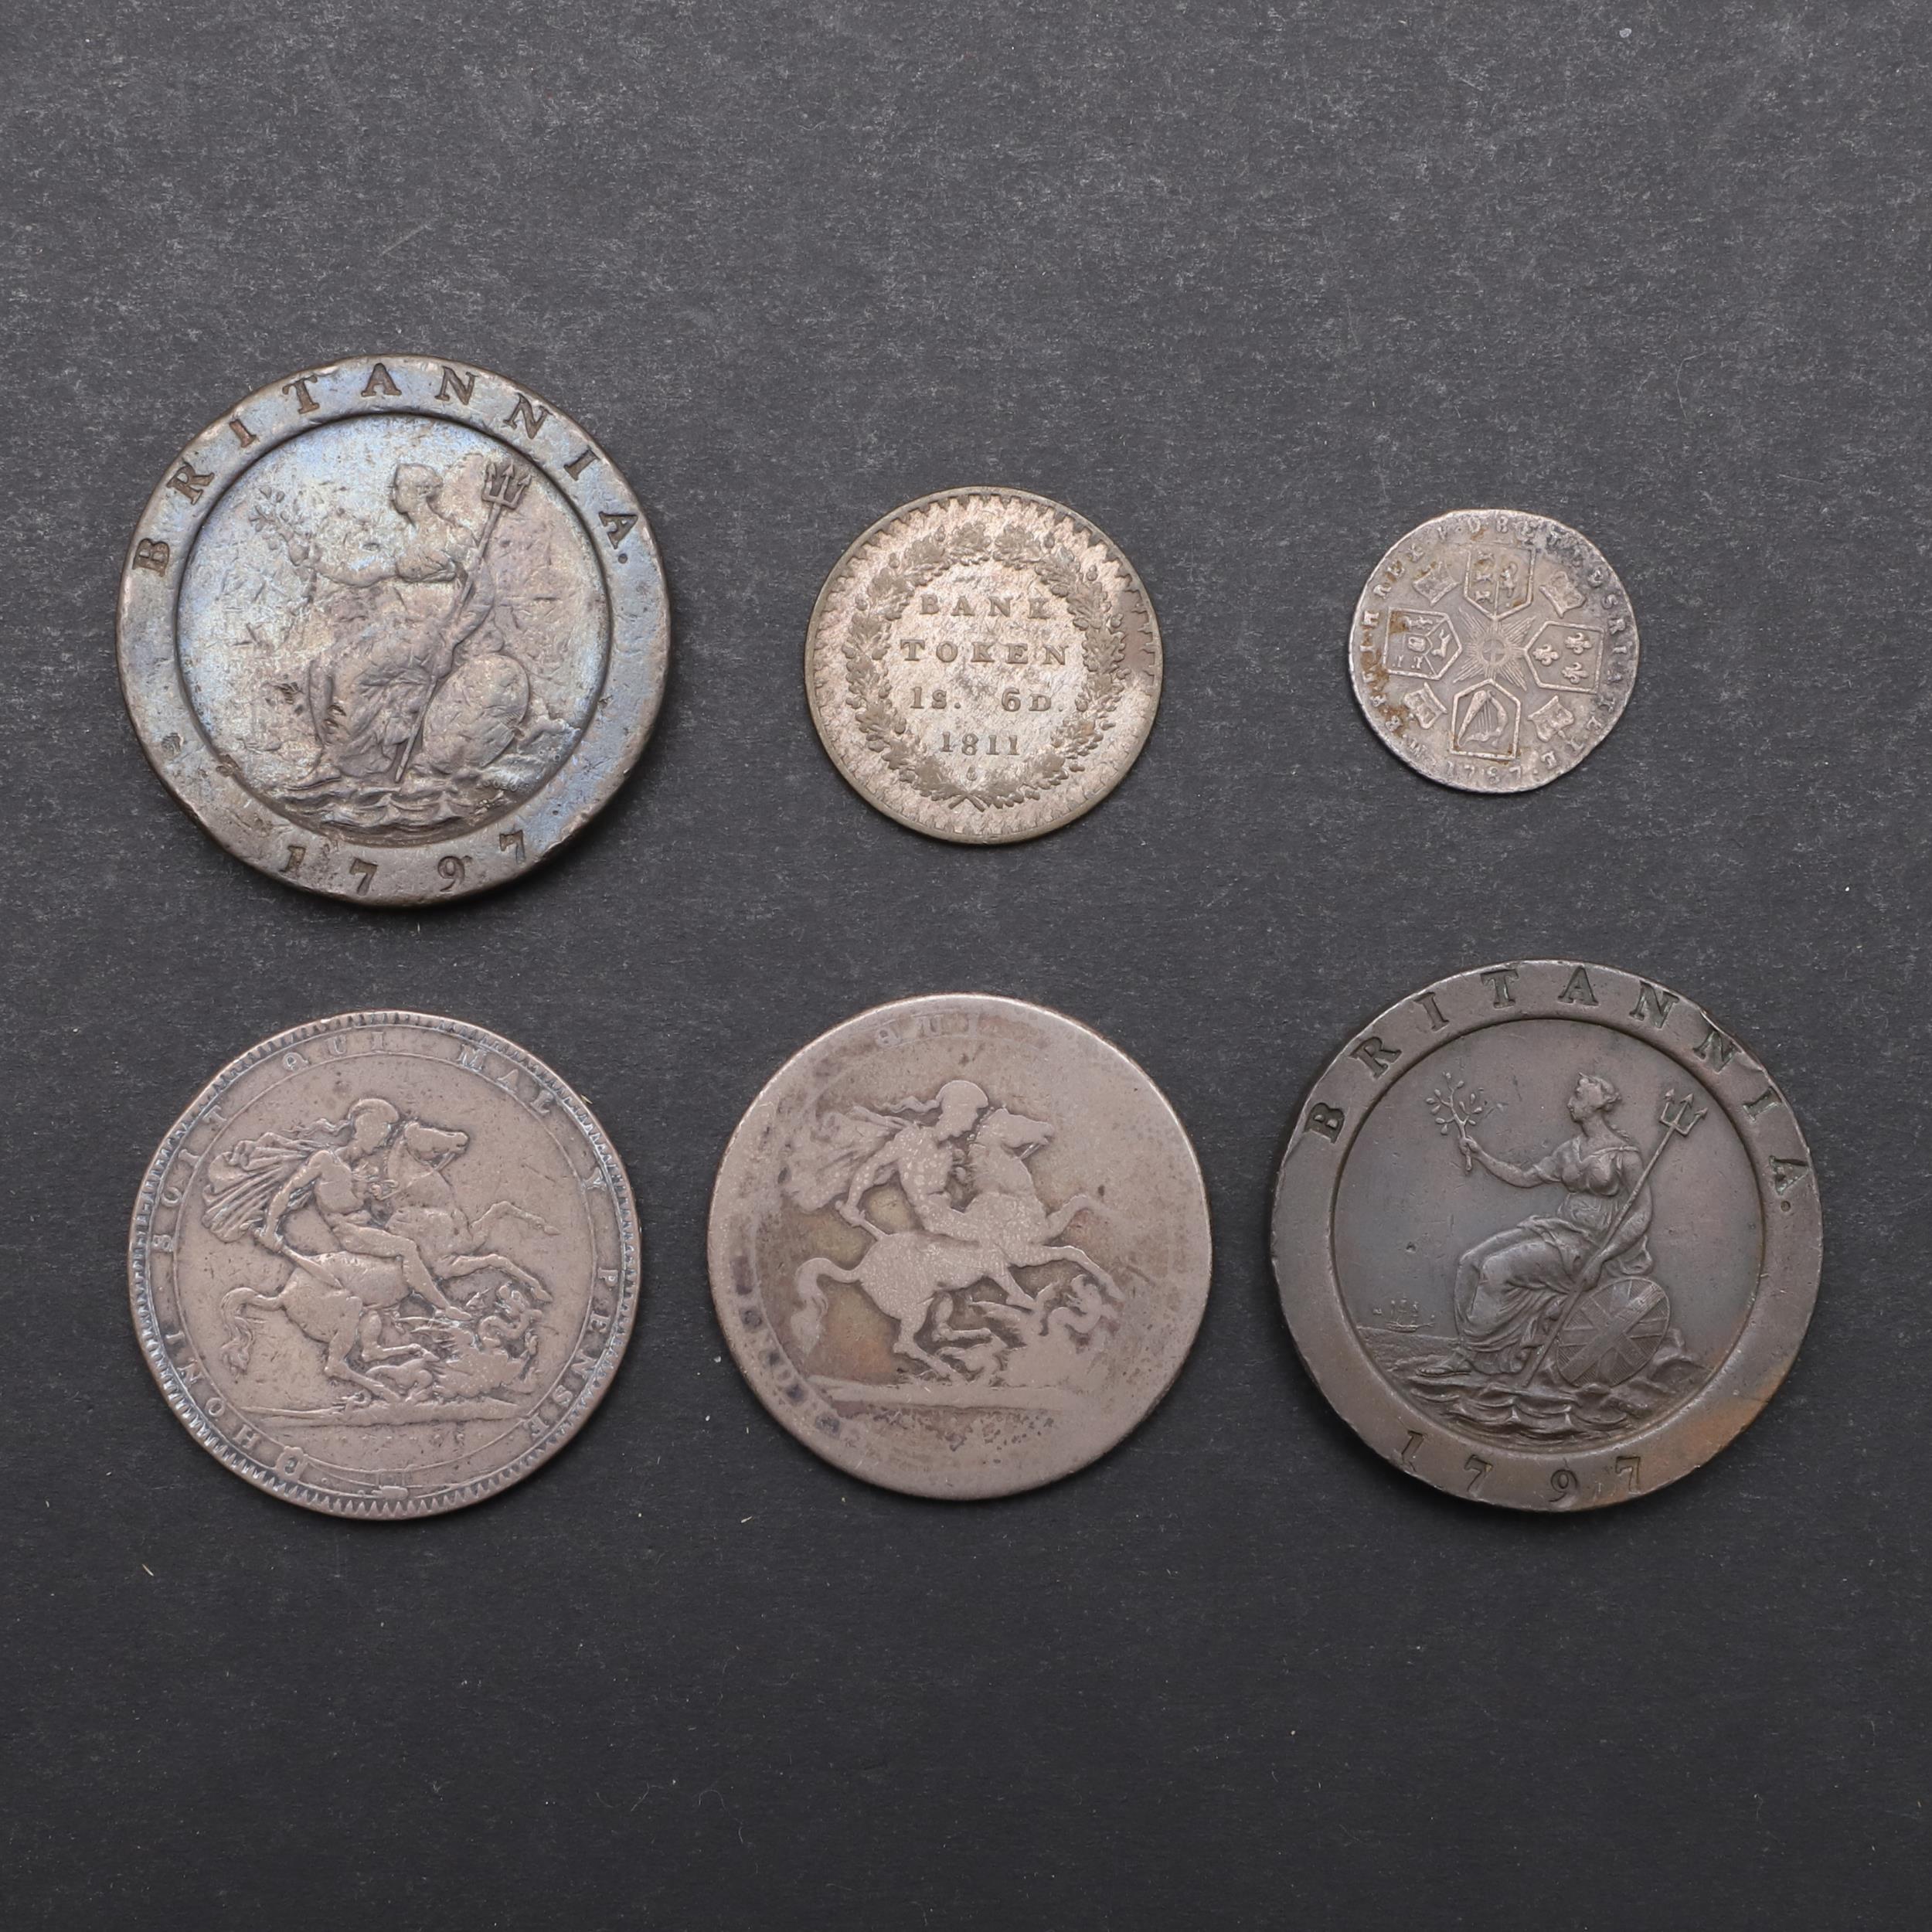 A GEORGE III CROWN AND A SMALL COLLECTION OF SIMILAR COINS. - Image 6 of 7